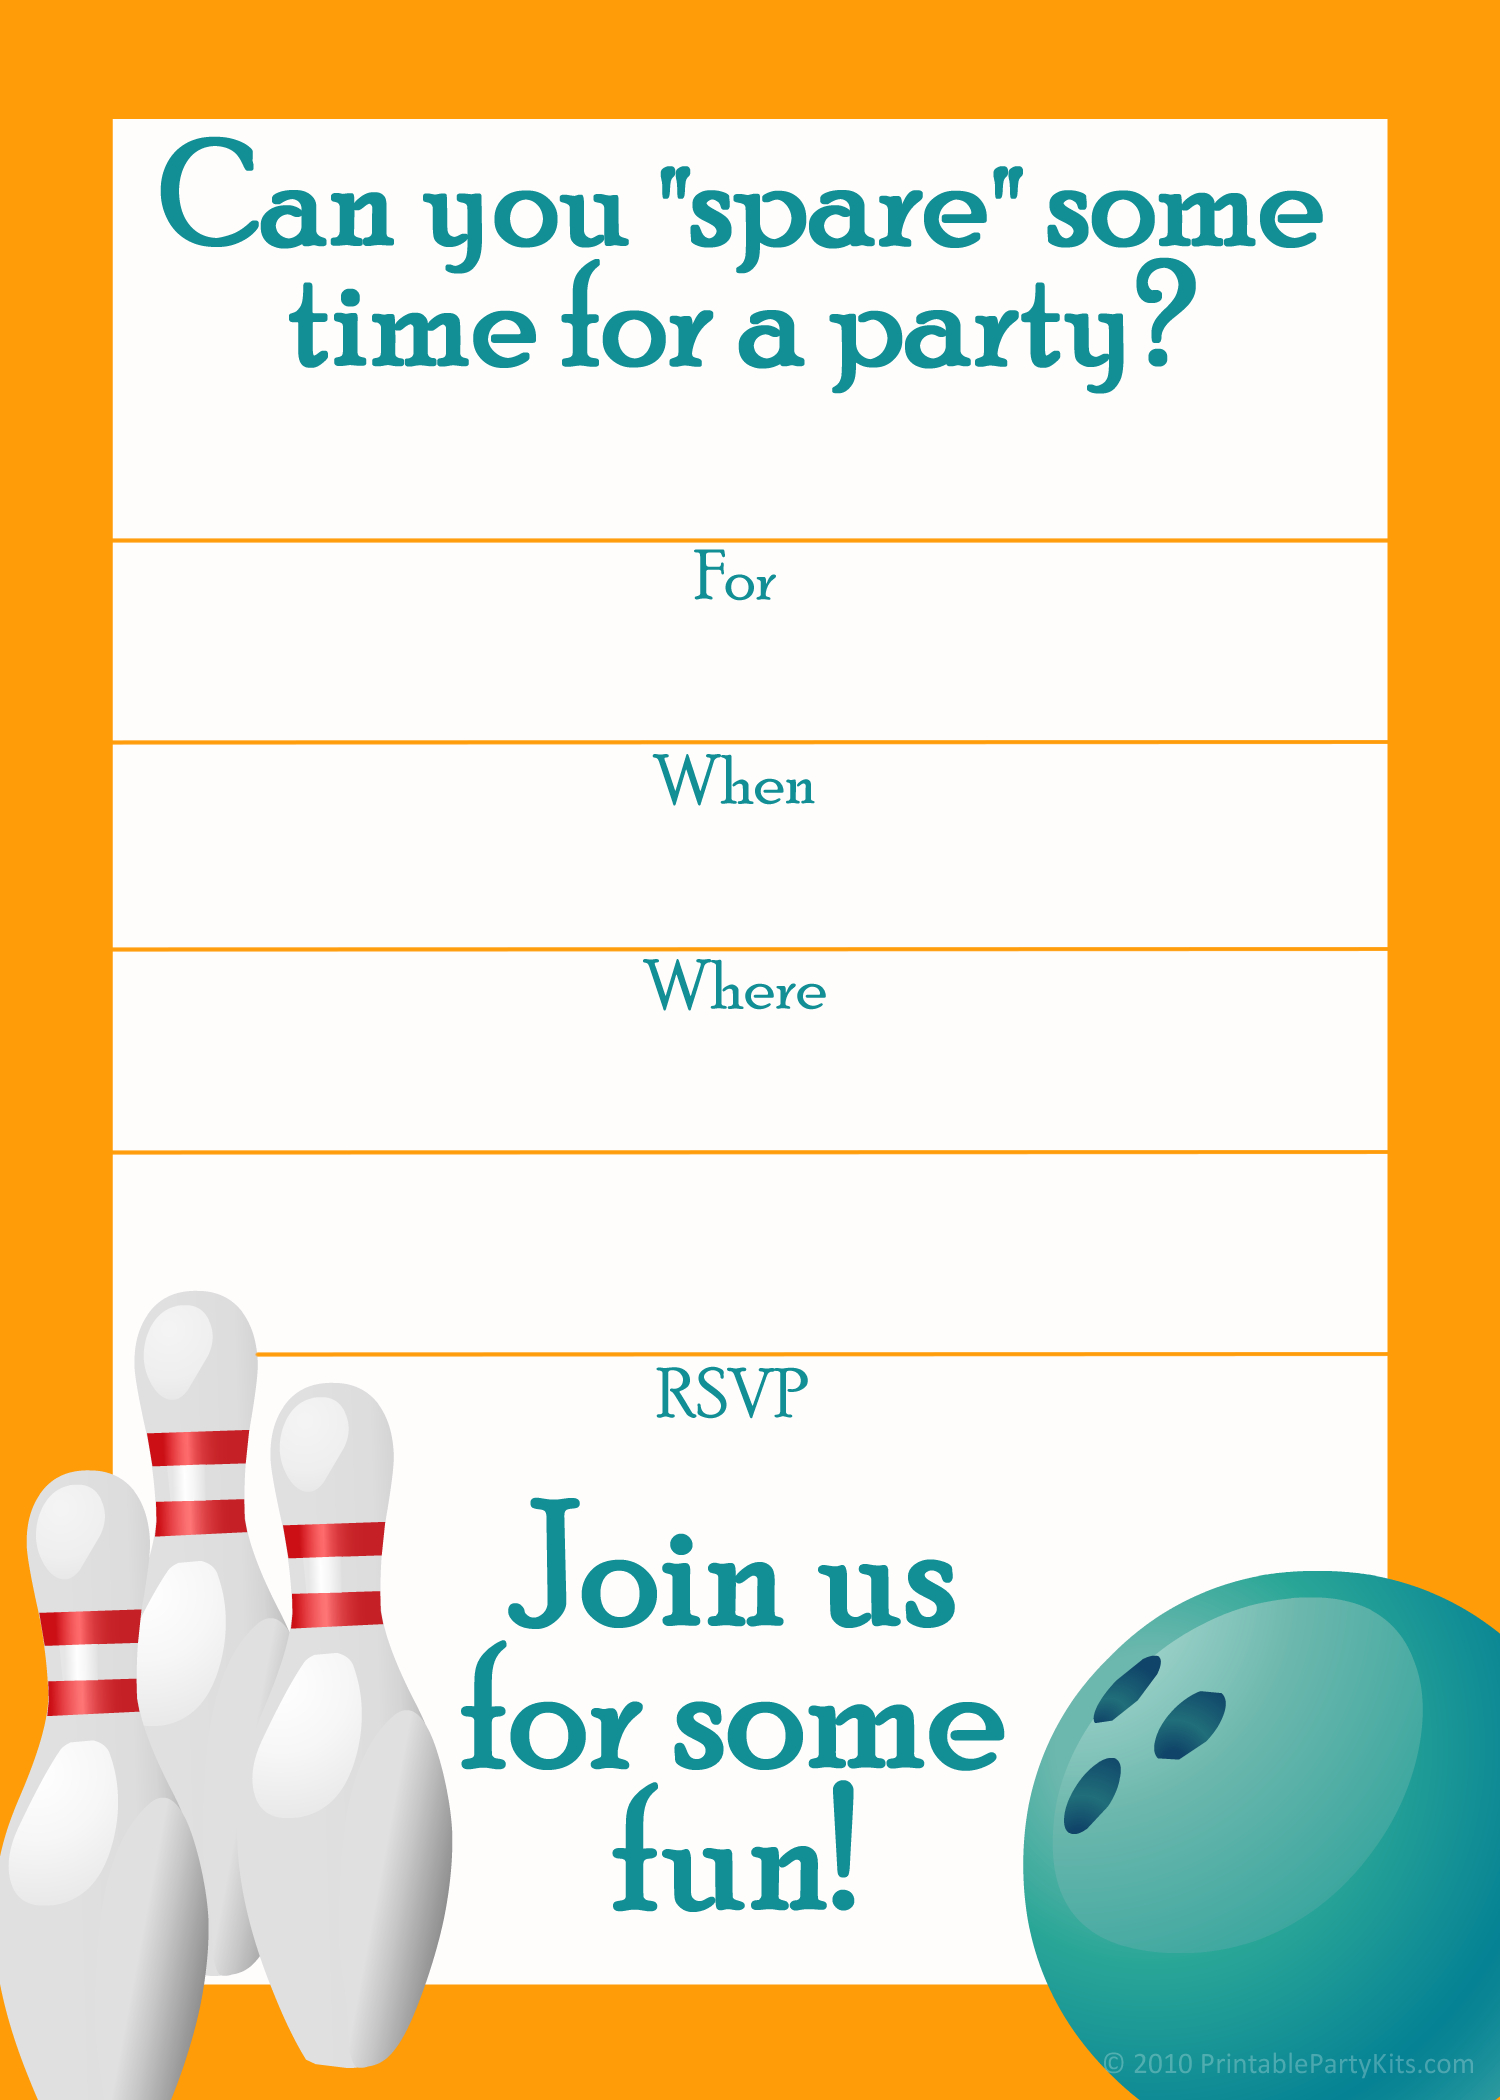 Free Printable Sports Birthday Party Invitations Templates | Party - Free Printable Bowling Ball Template